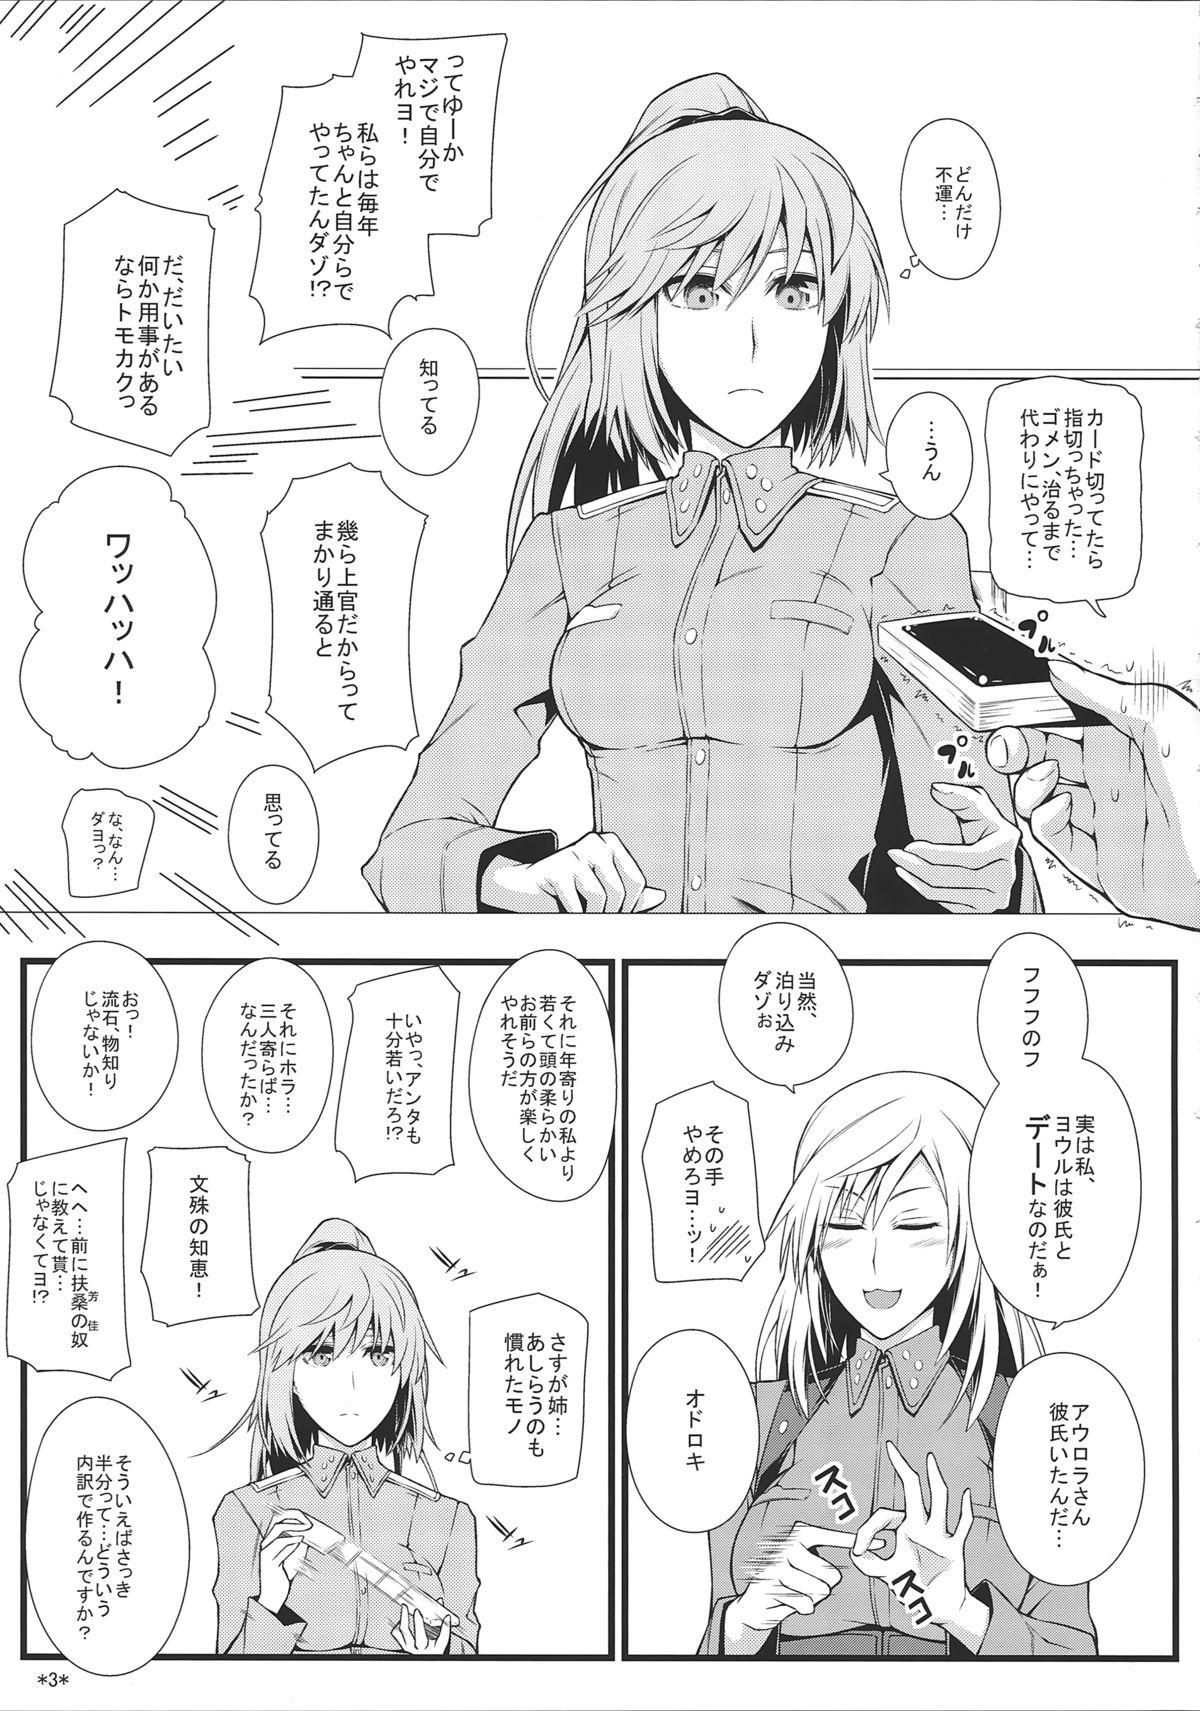 Chat KARLSLAND SYNDROME 3 - Strike witches Cbt - Page 5